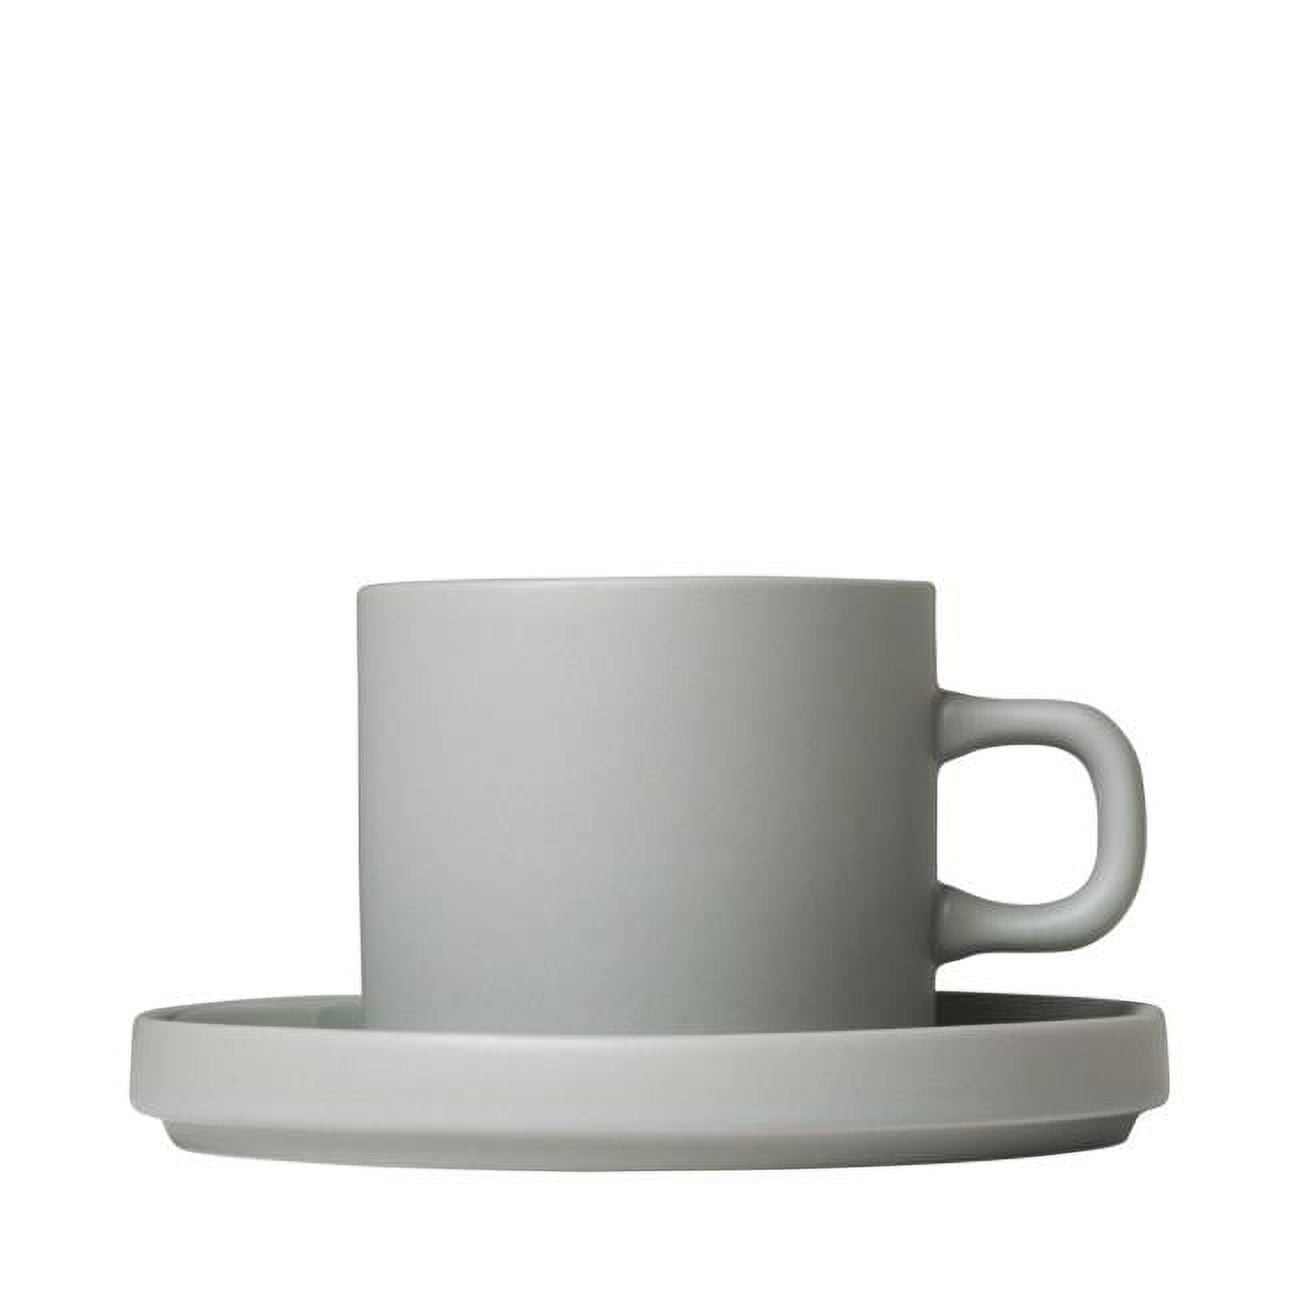 63911 7 Oz Mio Coffee Cups With Saucers, Mirage Grey - Set Of 2